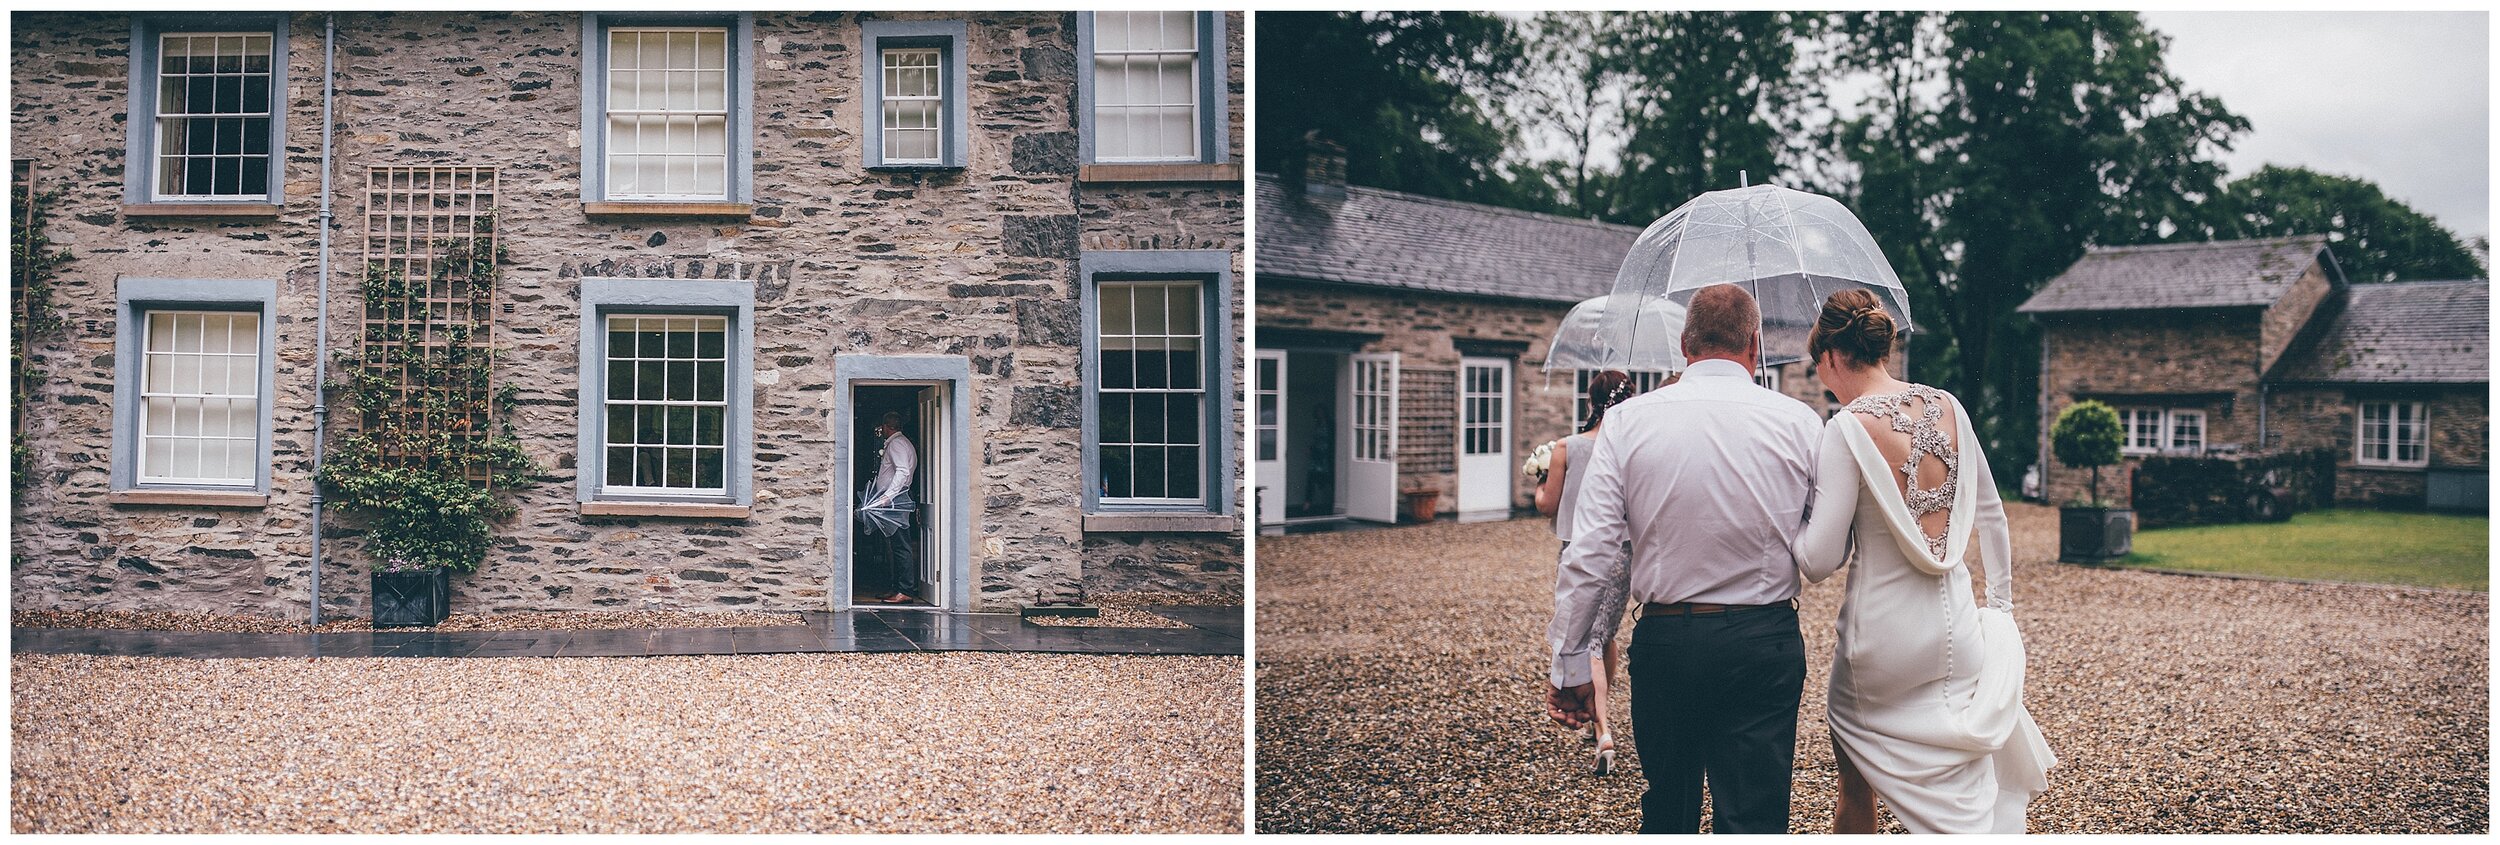 The bride and her dad walk across to the wedding ceremony at Silverholme Manor in the rain.